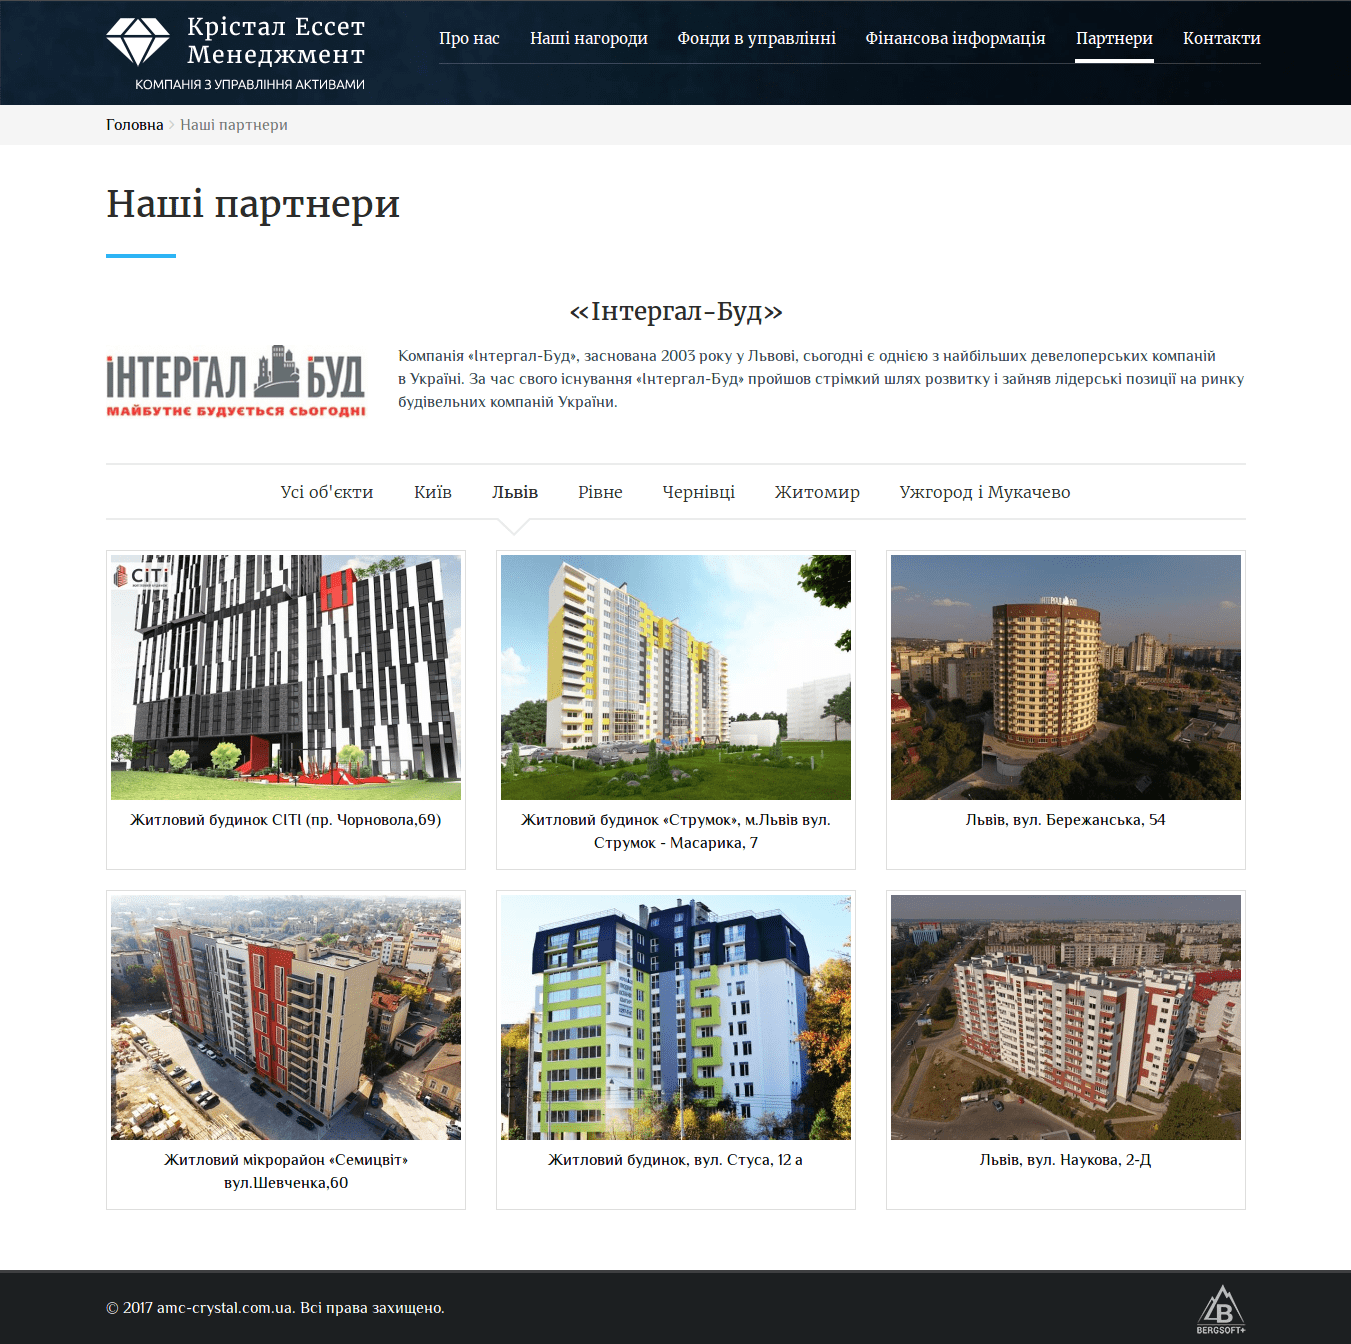 Page with information about company's partners